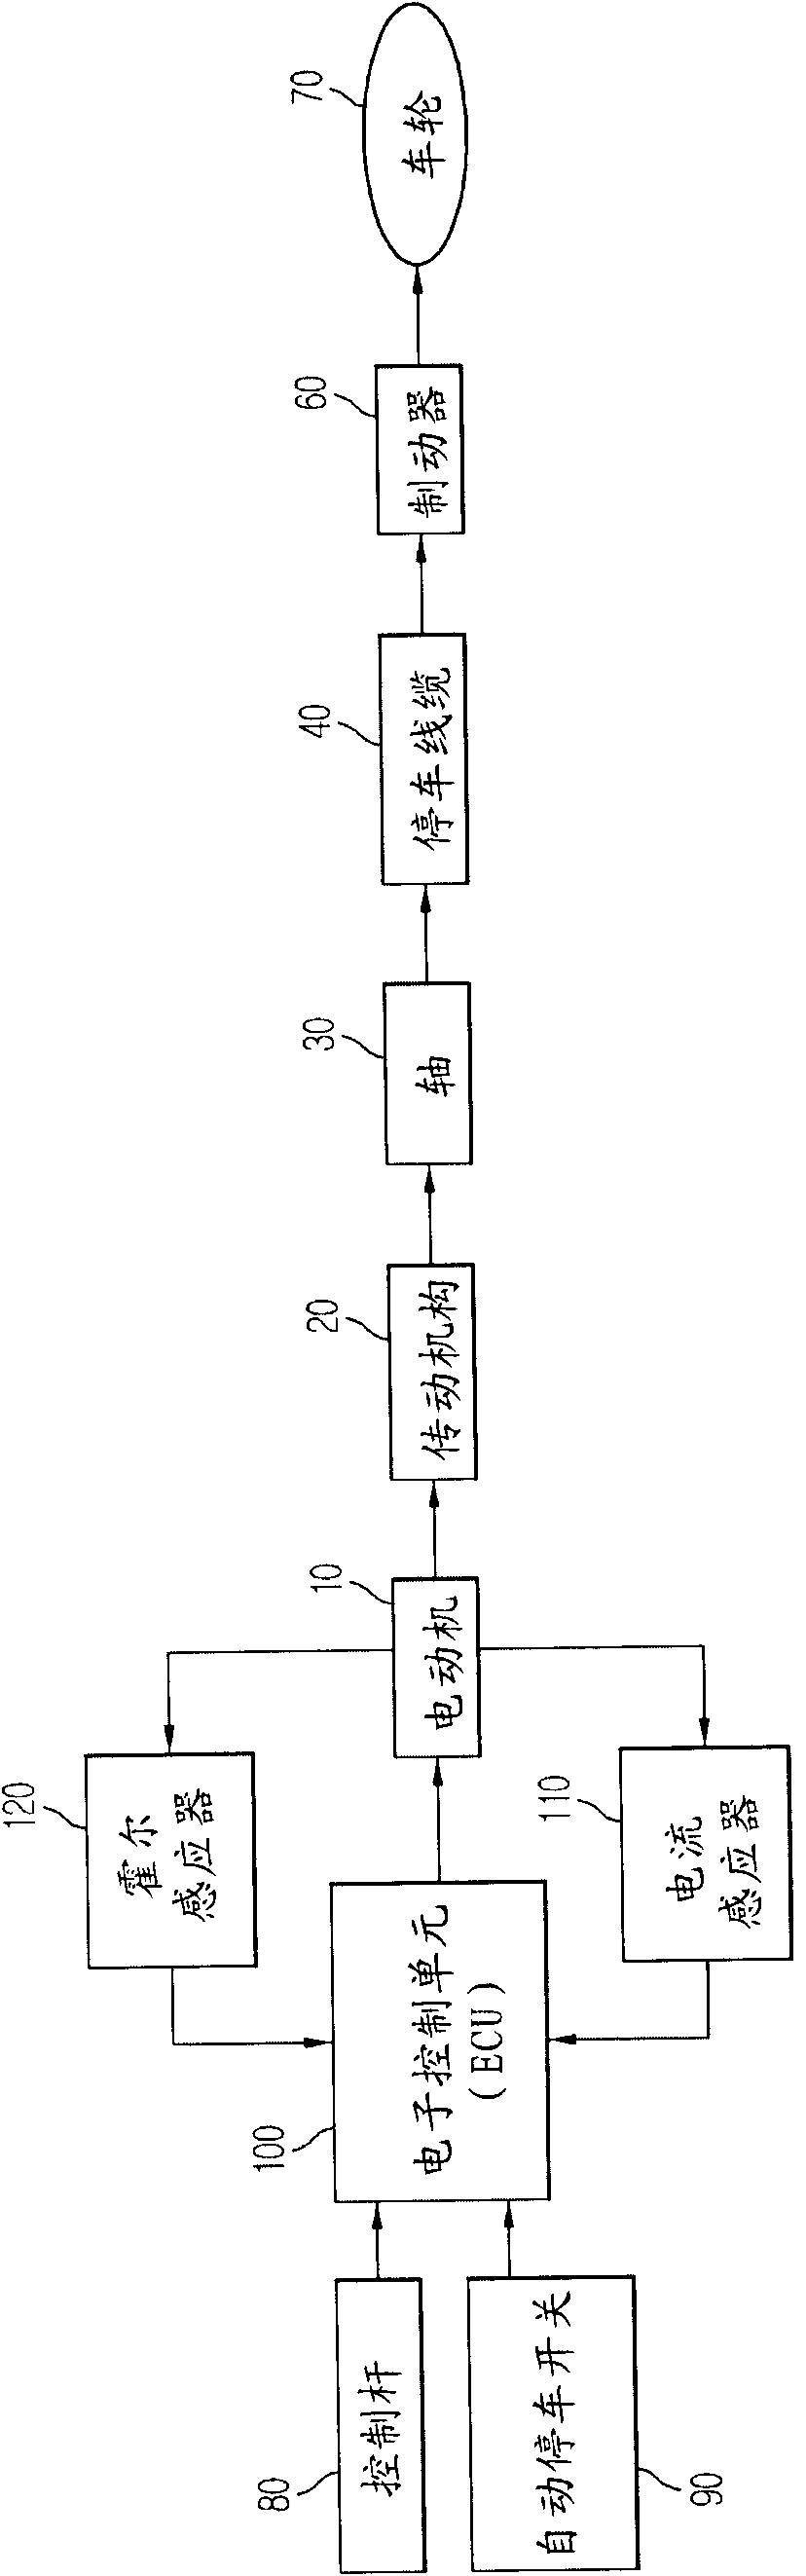 Electronic parking brake system and control method thereof